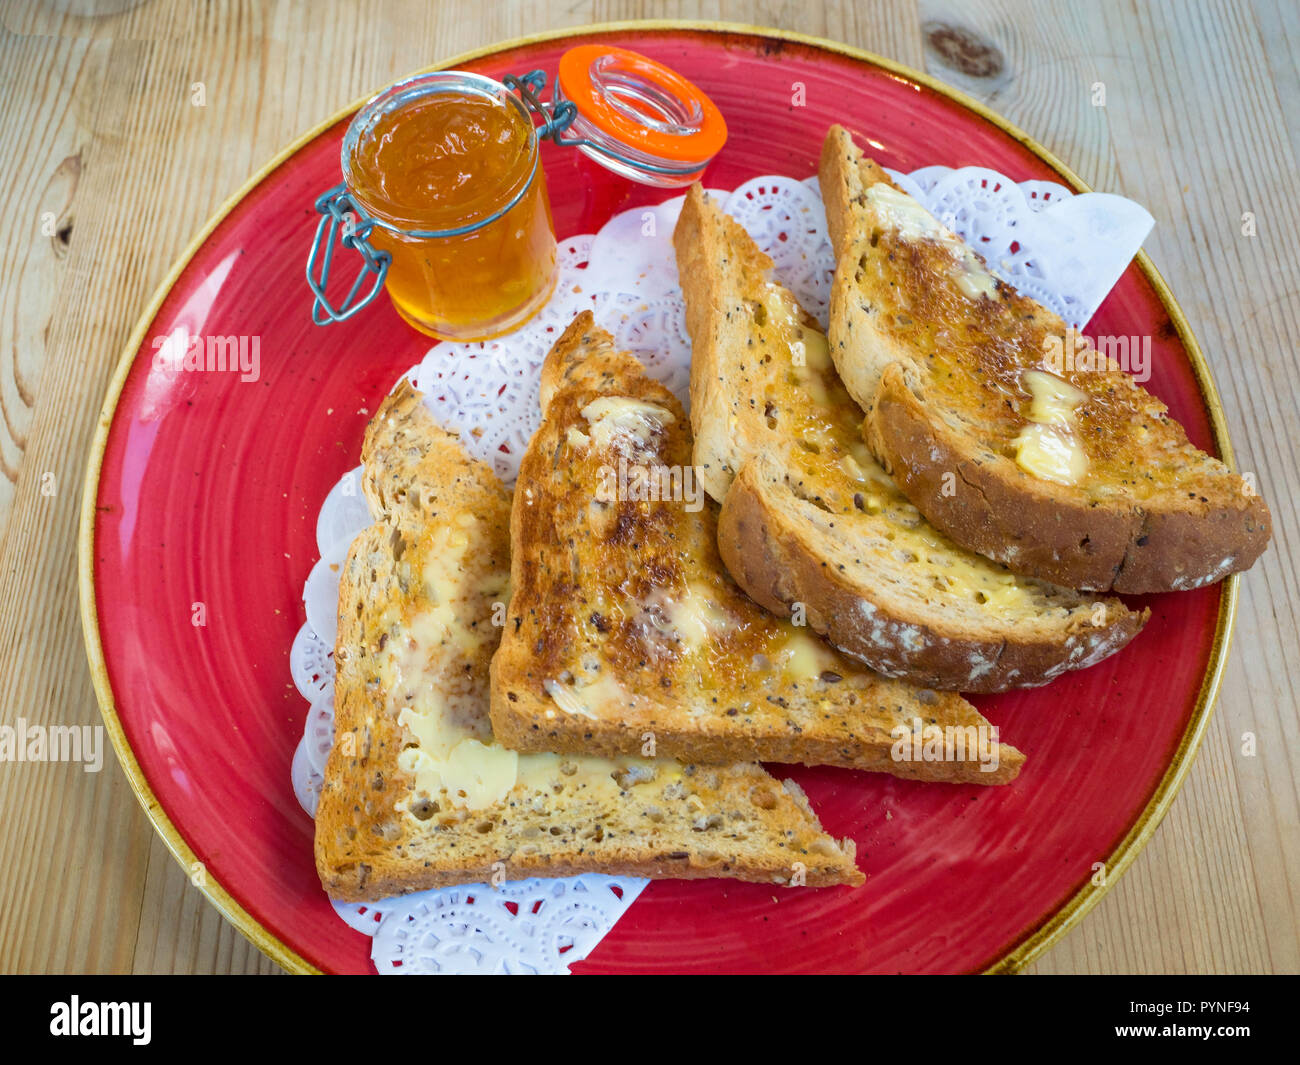 Buttered toasted multigrain brown bread and an open jar of marmalade, a  breakfast or afternoon tea snack in England UK Stock Photo